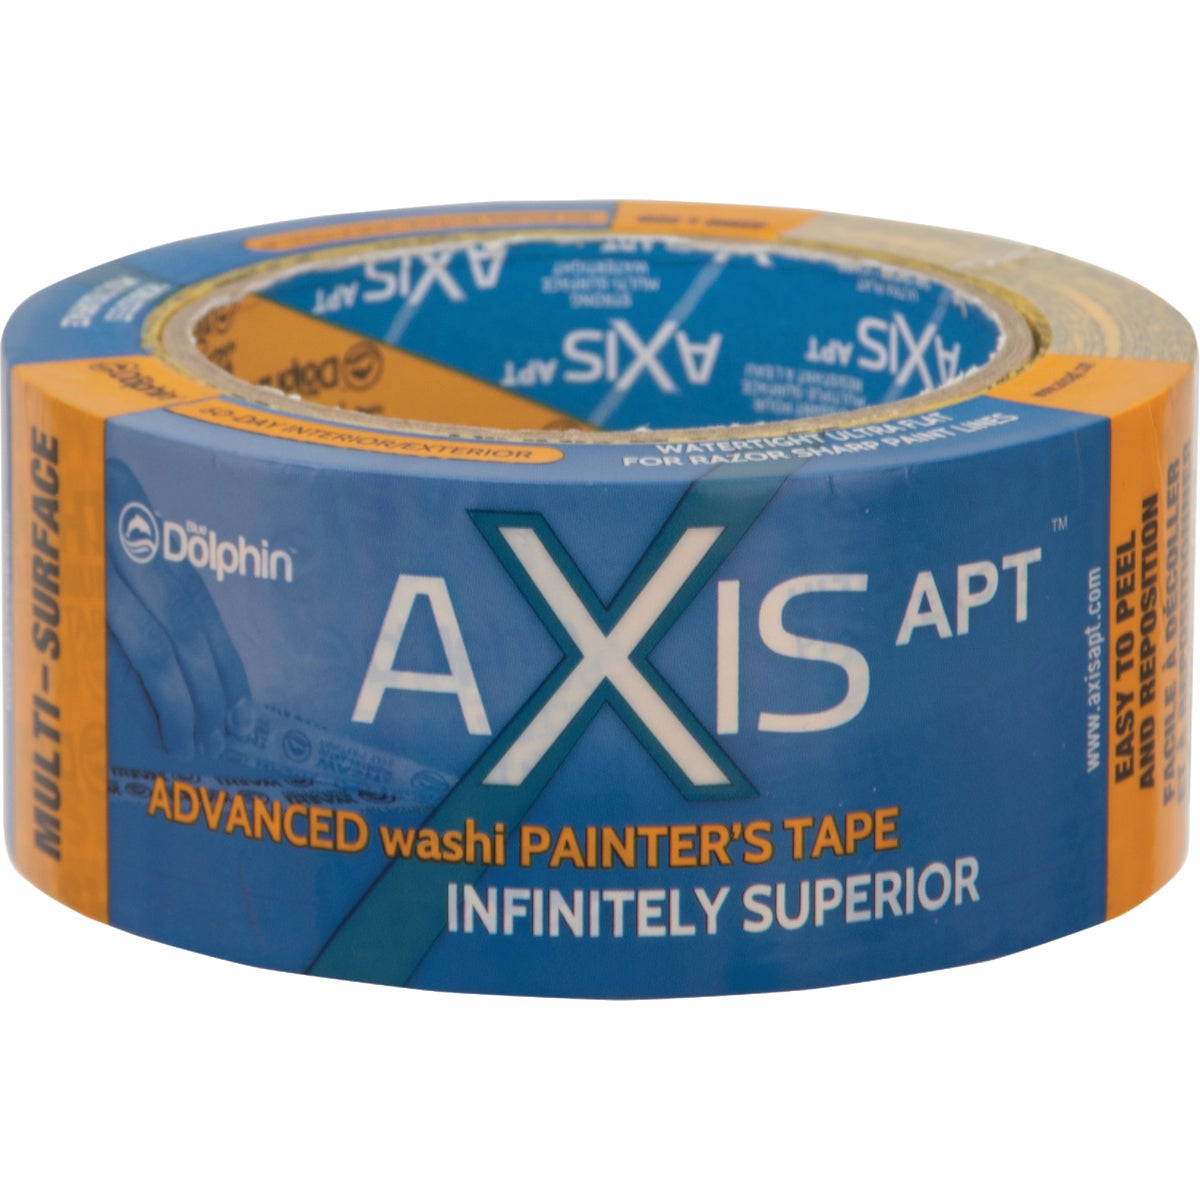 Blue Dolphin Axis APT 1.88 In. x 54.6 Yd. Washi Painter's Tape 